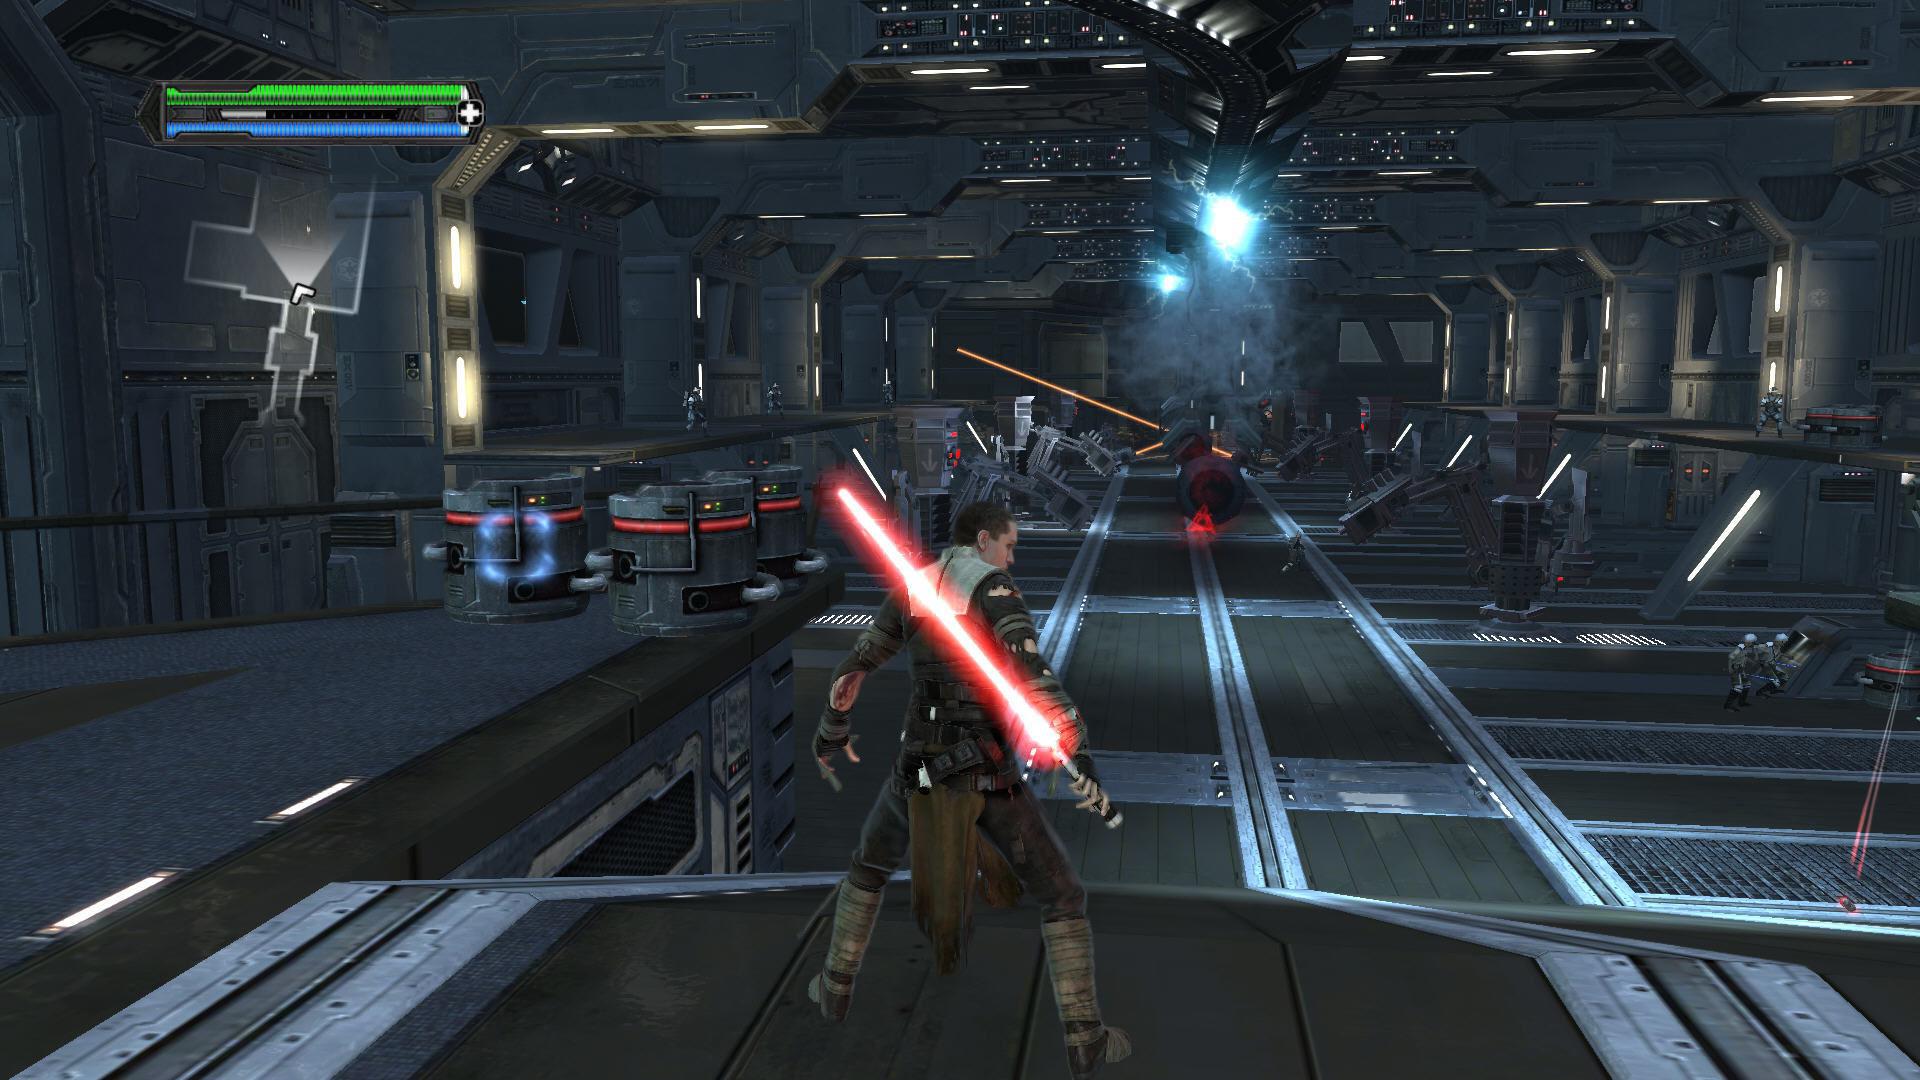 Игры star games. Игра Star Wars unleashed 3. Стар ВАРС the Force unleashed 1. Star Wars: the Force unleashed - Ultimate Sith Edition. Star Wars the Force unleashed 2008.